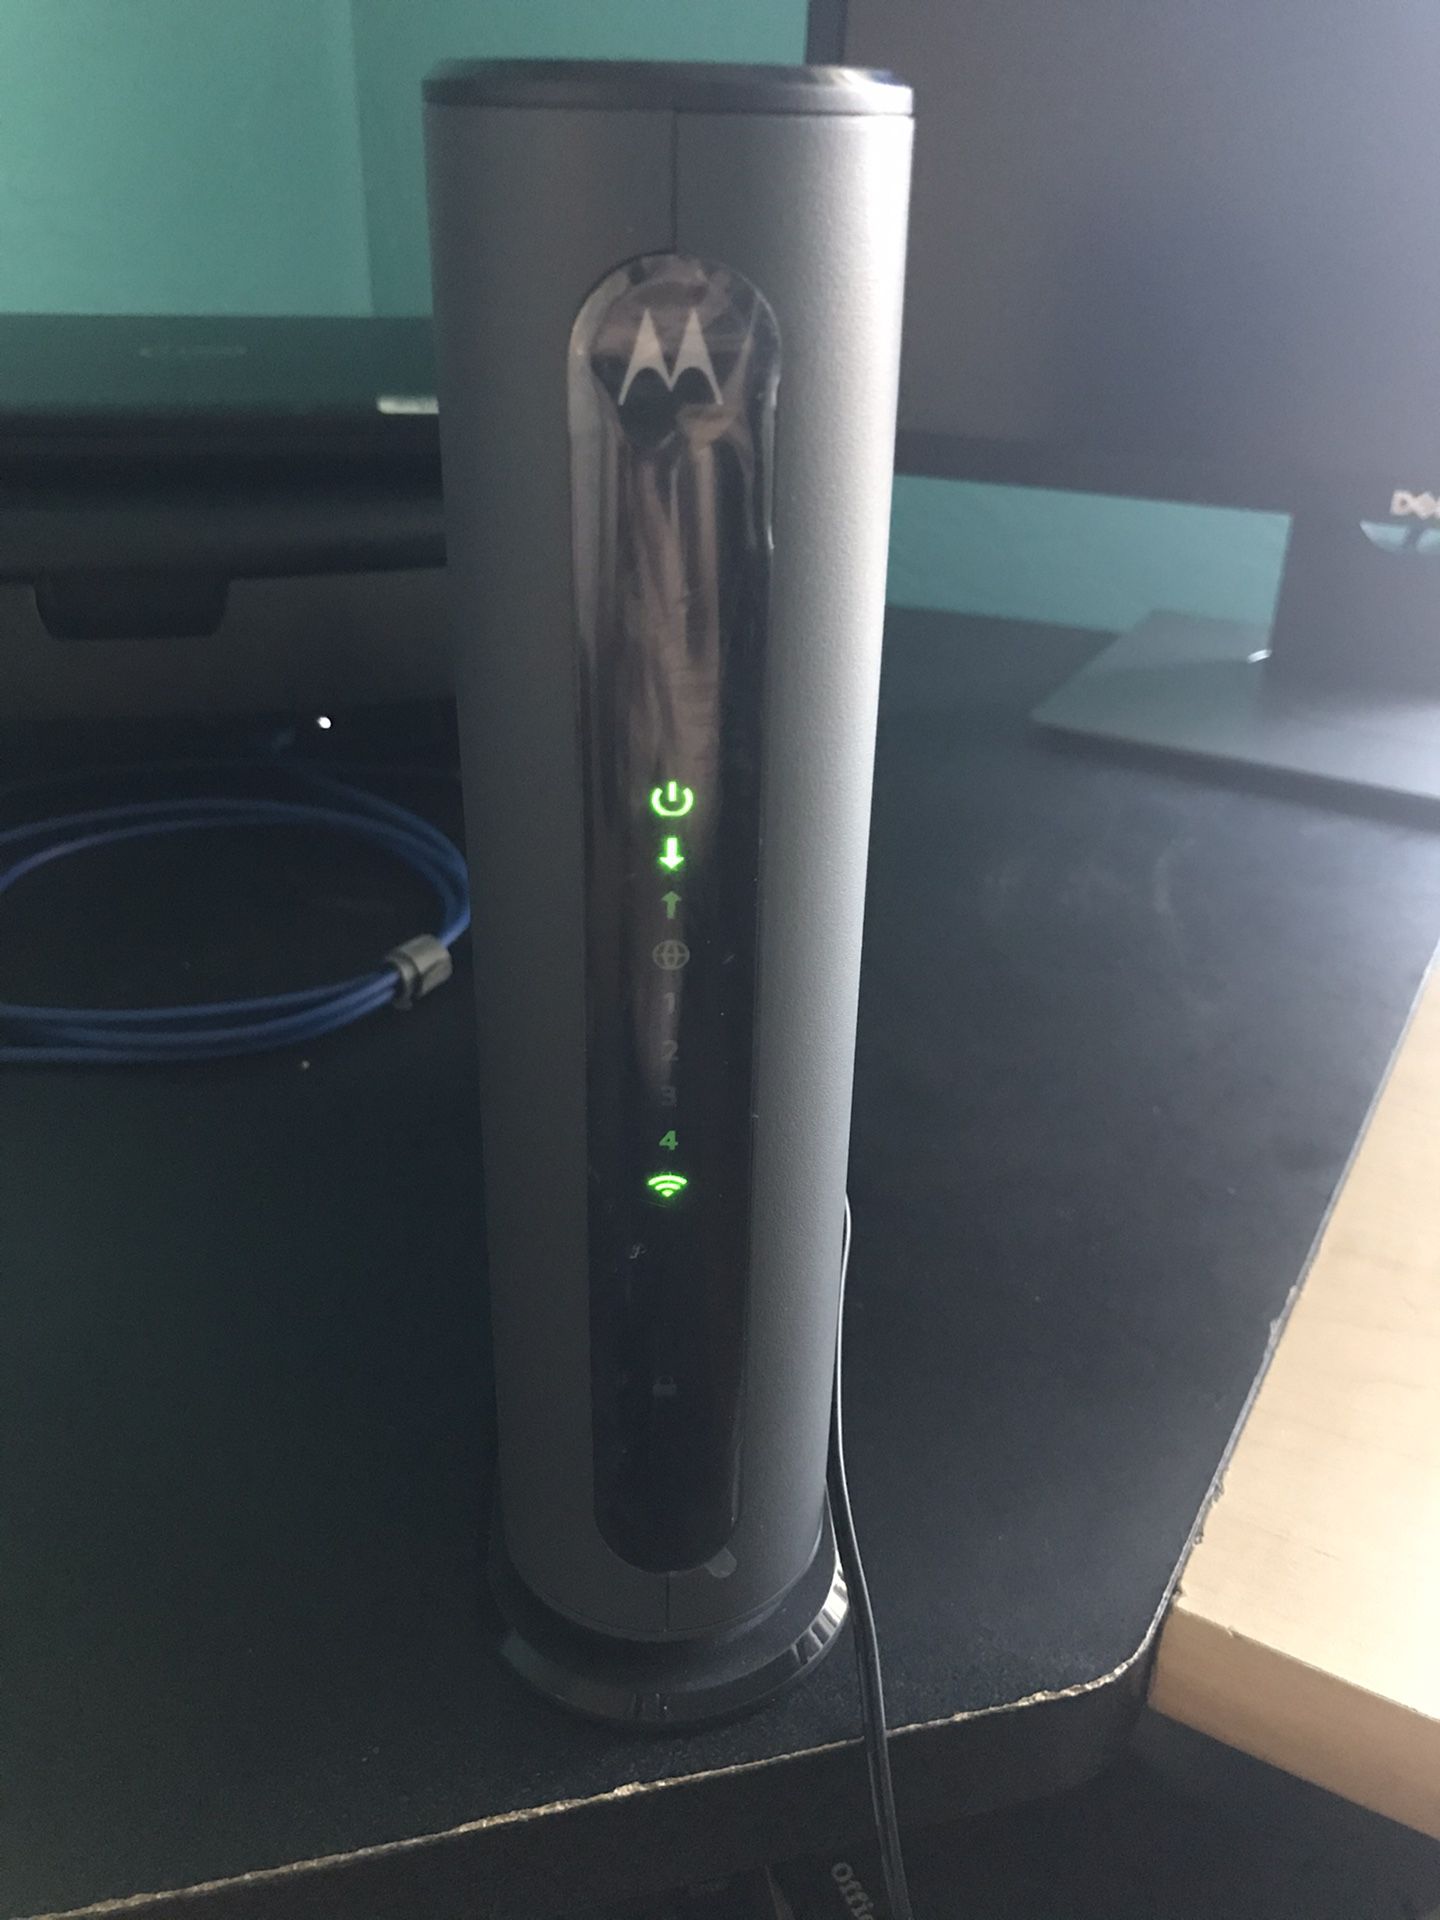 Motorola Cable Modem + Router Combo